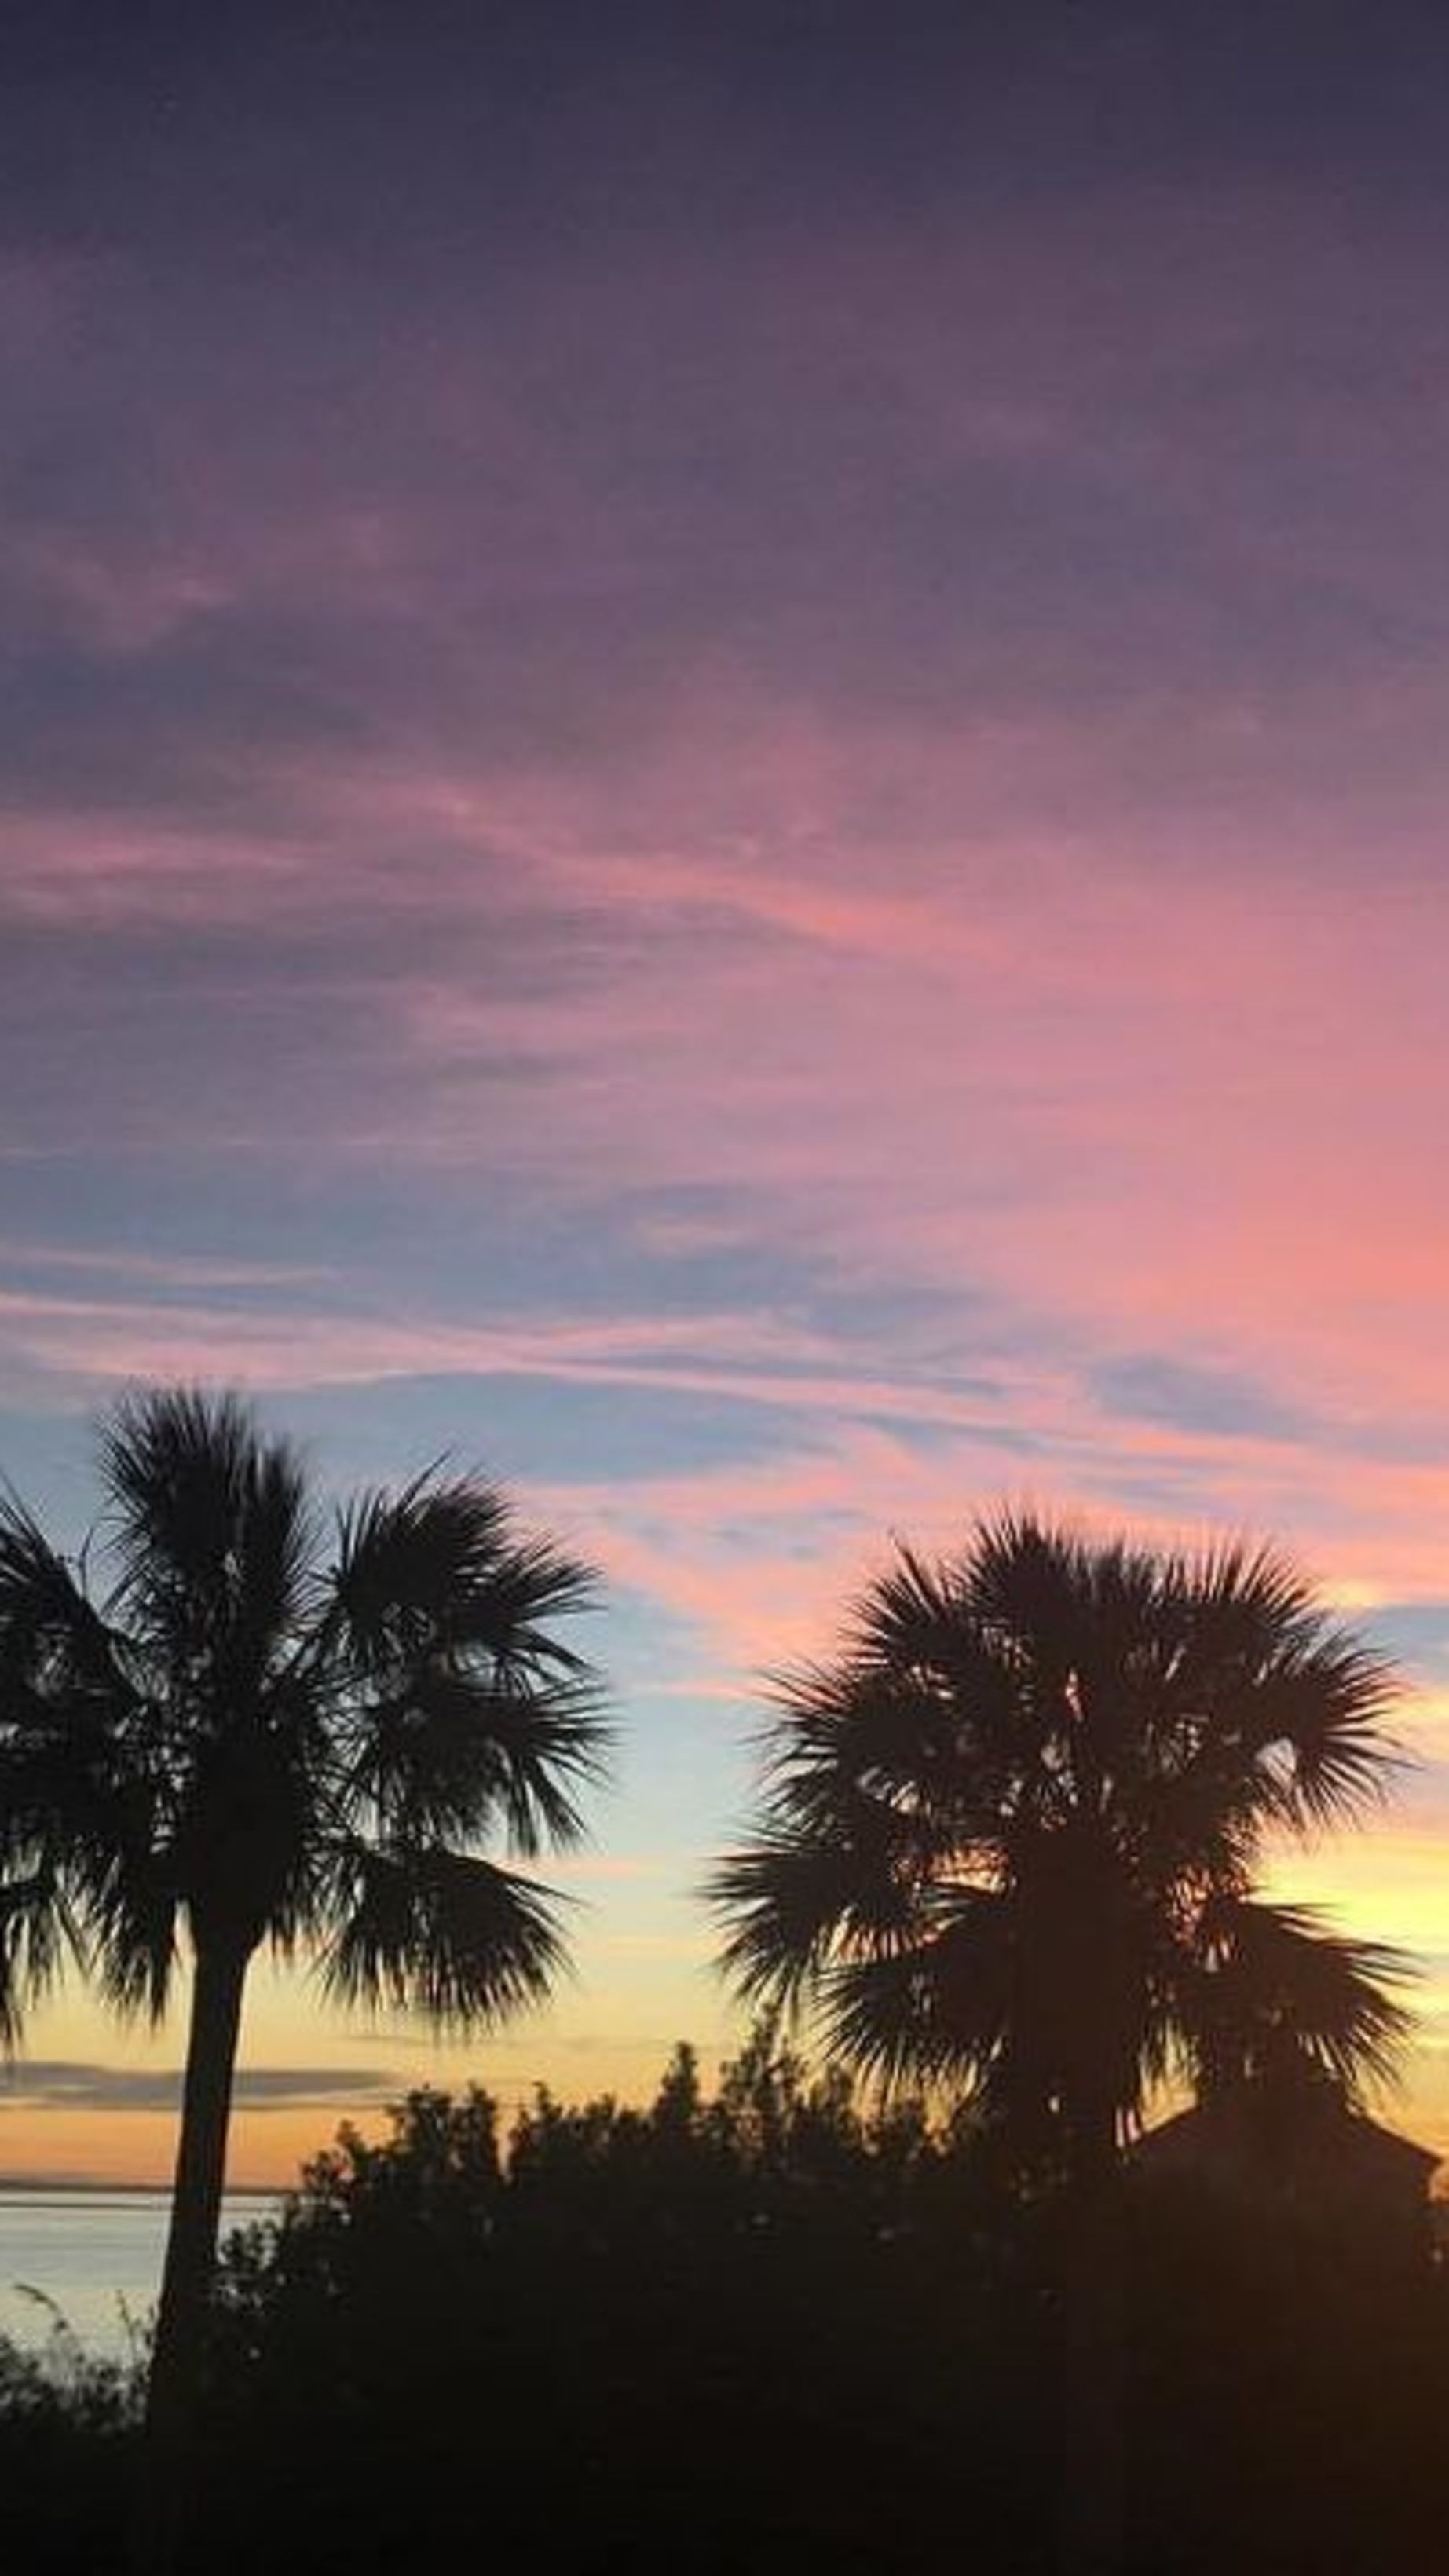 Photo of the Day: Palmettos silhouetted against the sunset